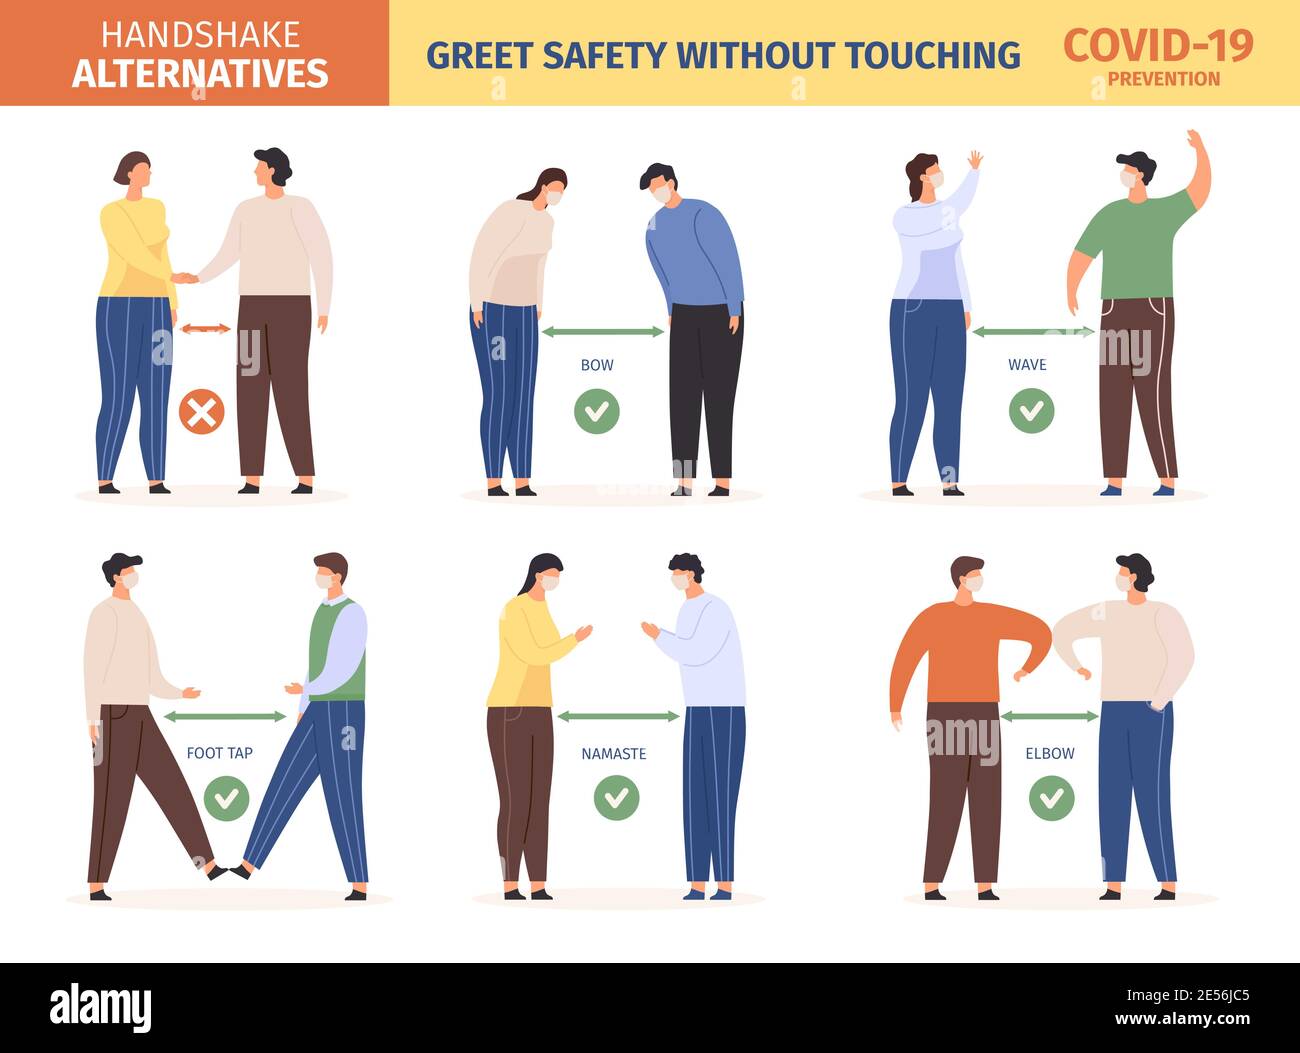 Safe greeting. People in masks keep social distance and use alternative greet, stop spread coronavirus. Avoid handshake vector infographic Stock Vector